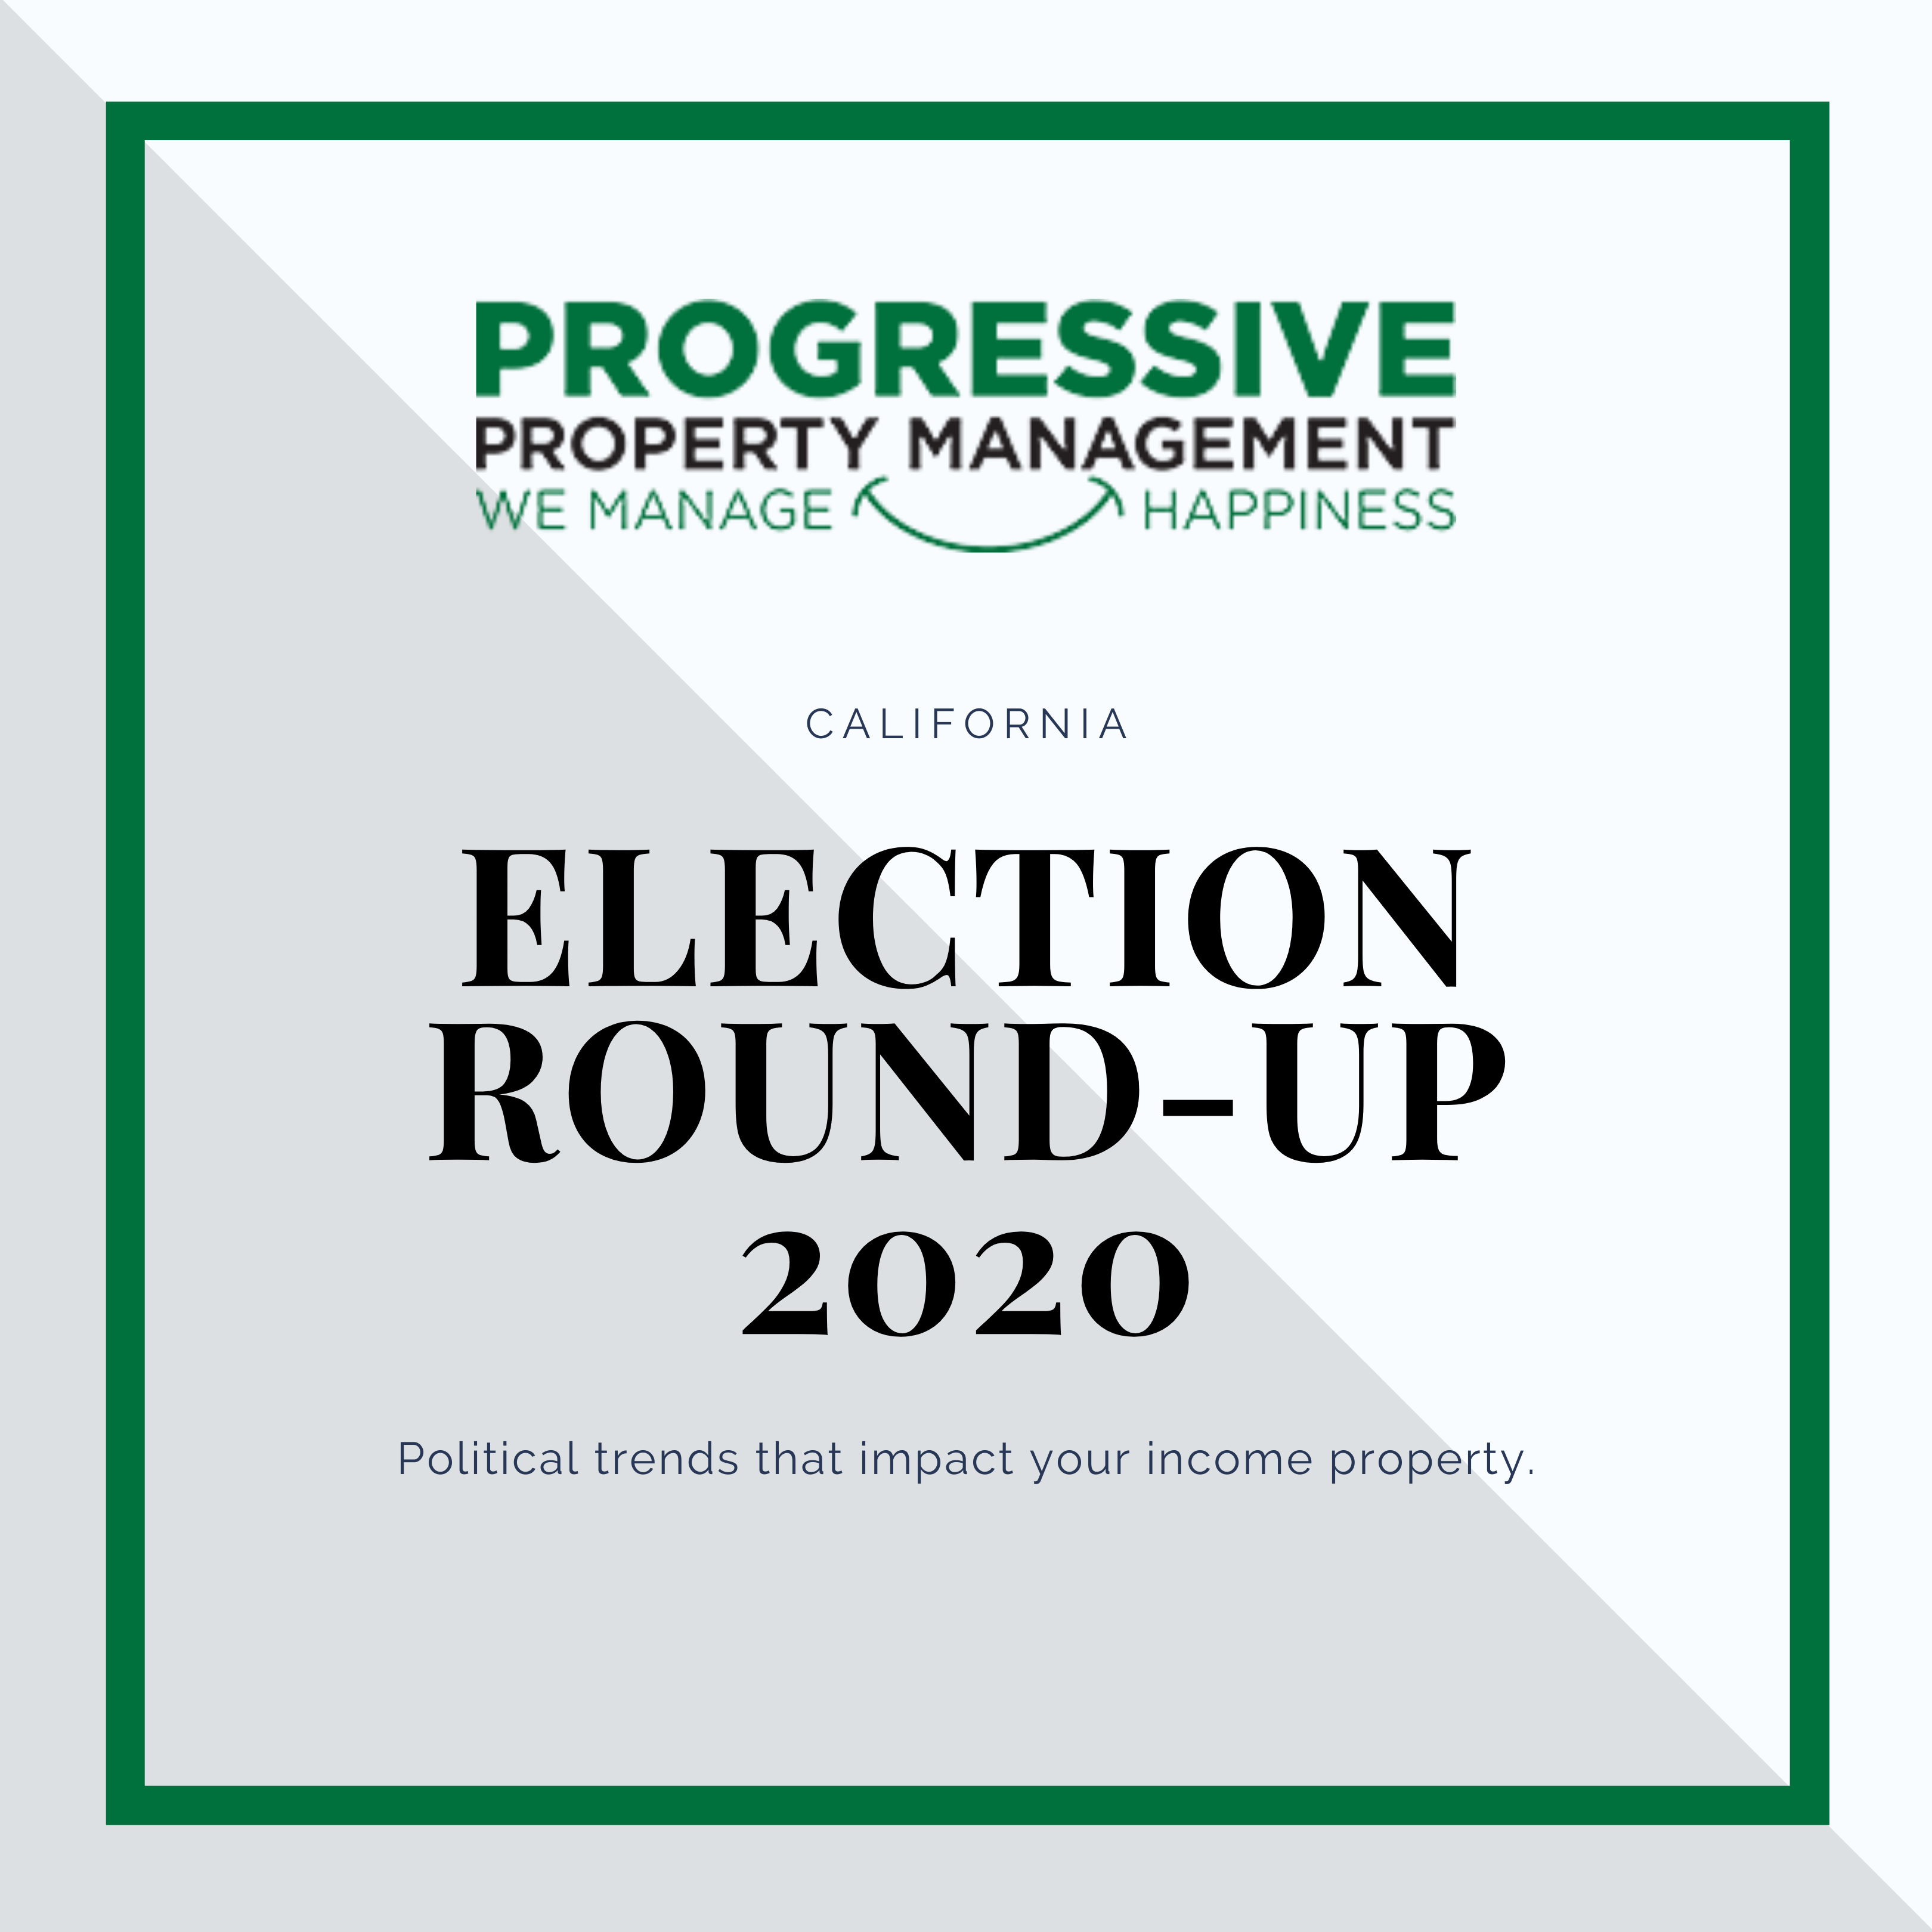 Election Round-Up 2020